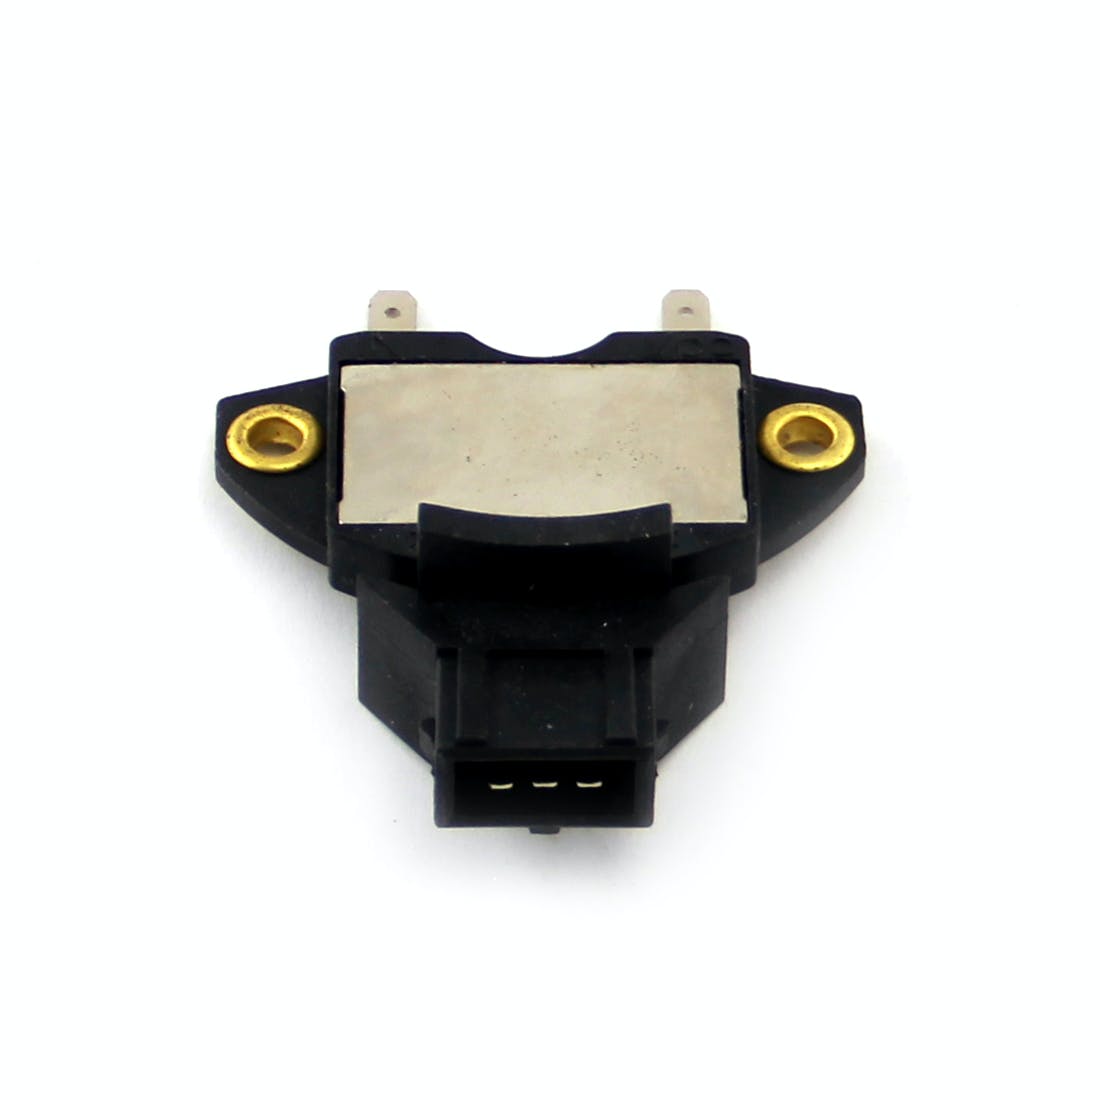 Speedmaster PCE383.1003 HEI Distributor 2 Pin Magnetic Pickup Ignition Control Module (Suits Pc8020)